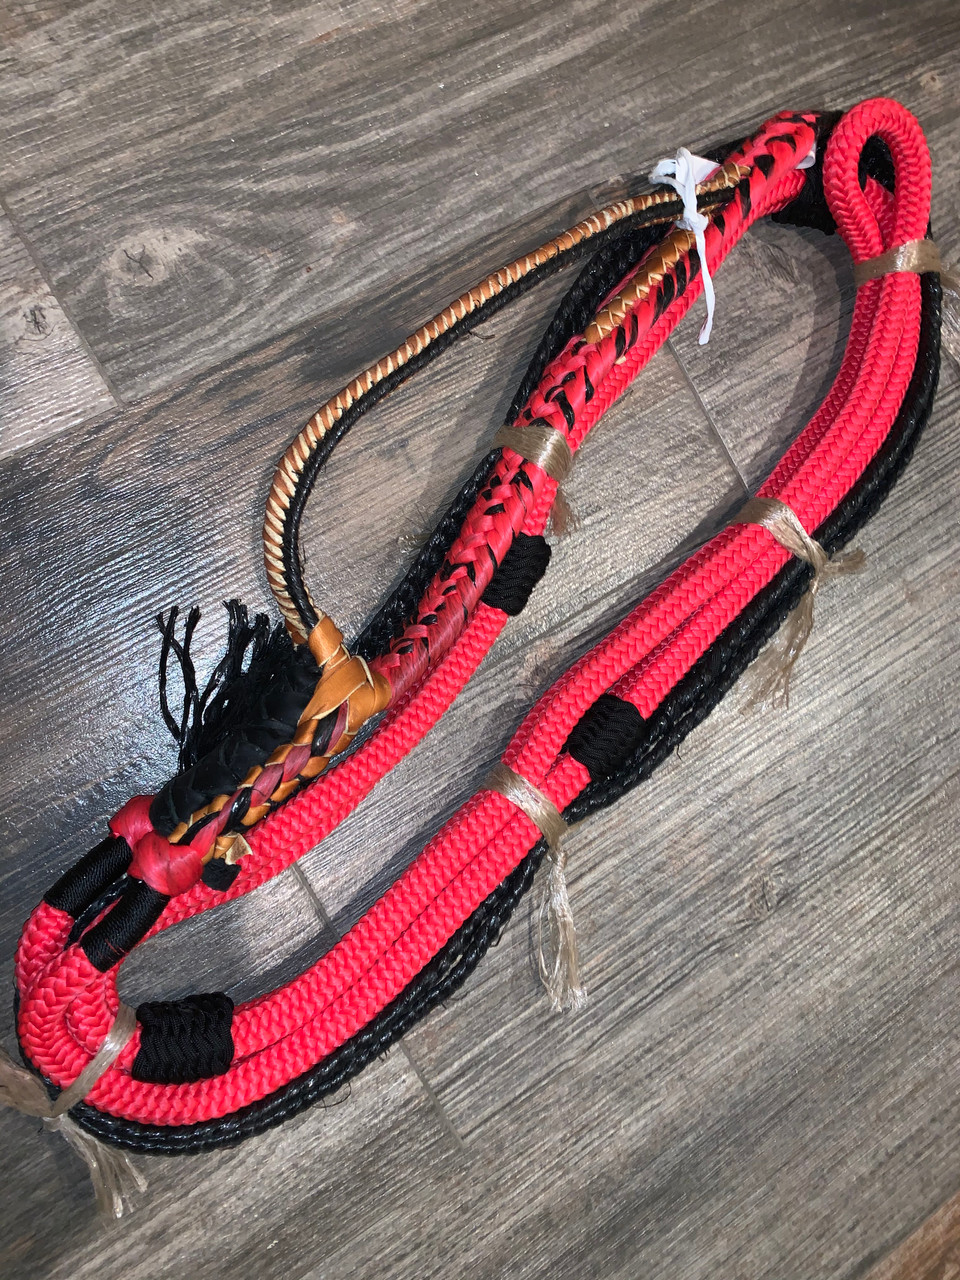 Insidious Red Rope- Pro 9/7 RH EPT Signature Bull Ropes 7/8 x 7/8- Rodeo  Rider -16